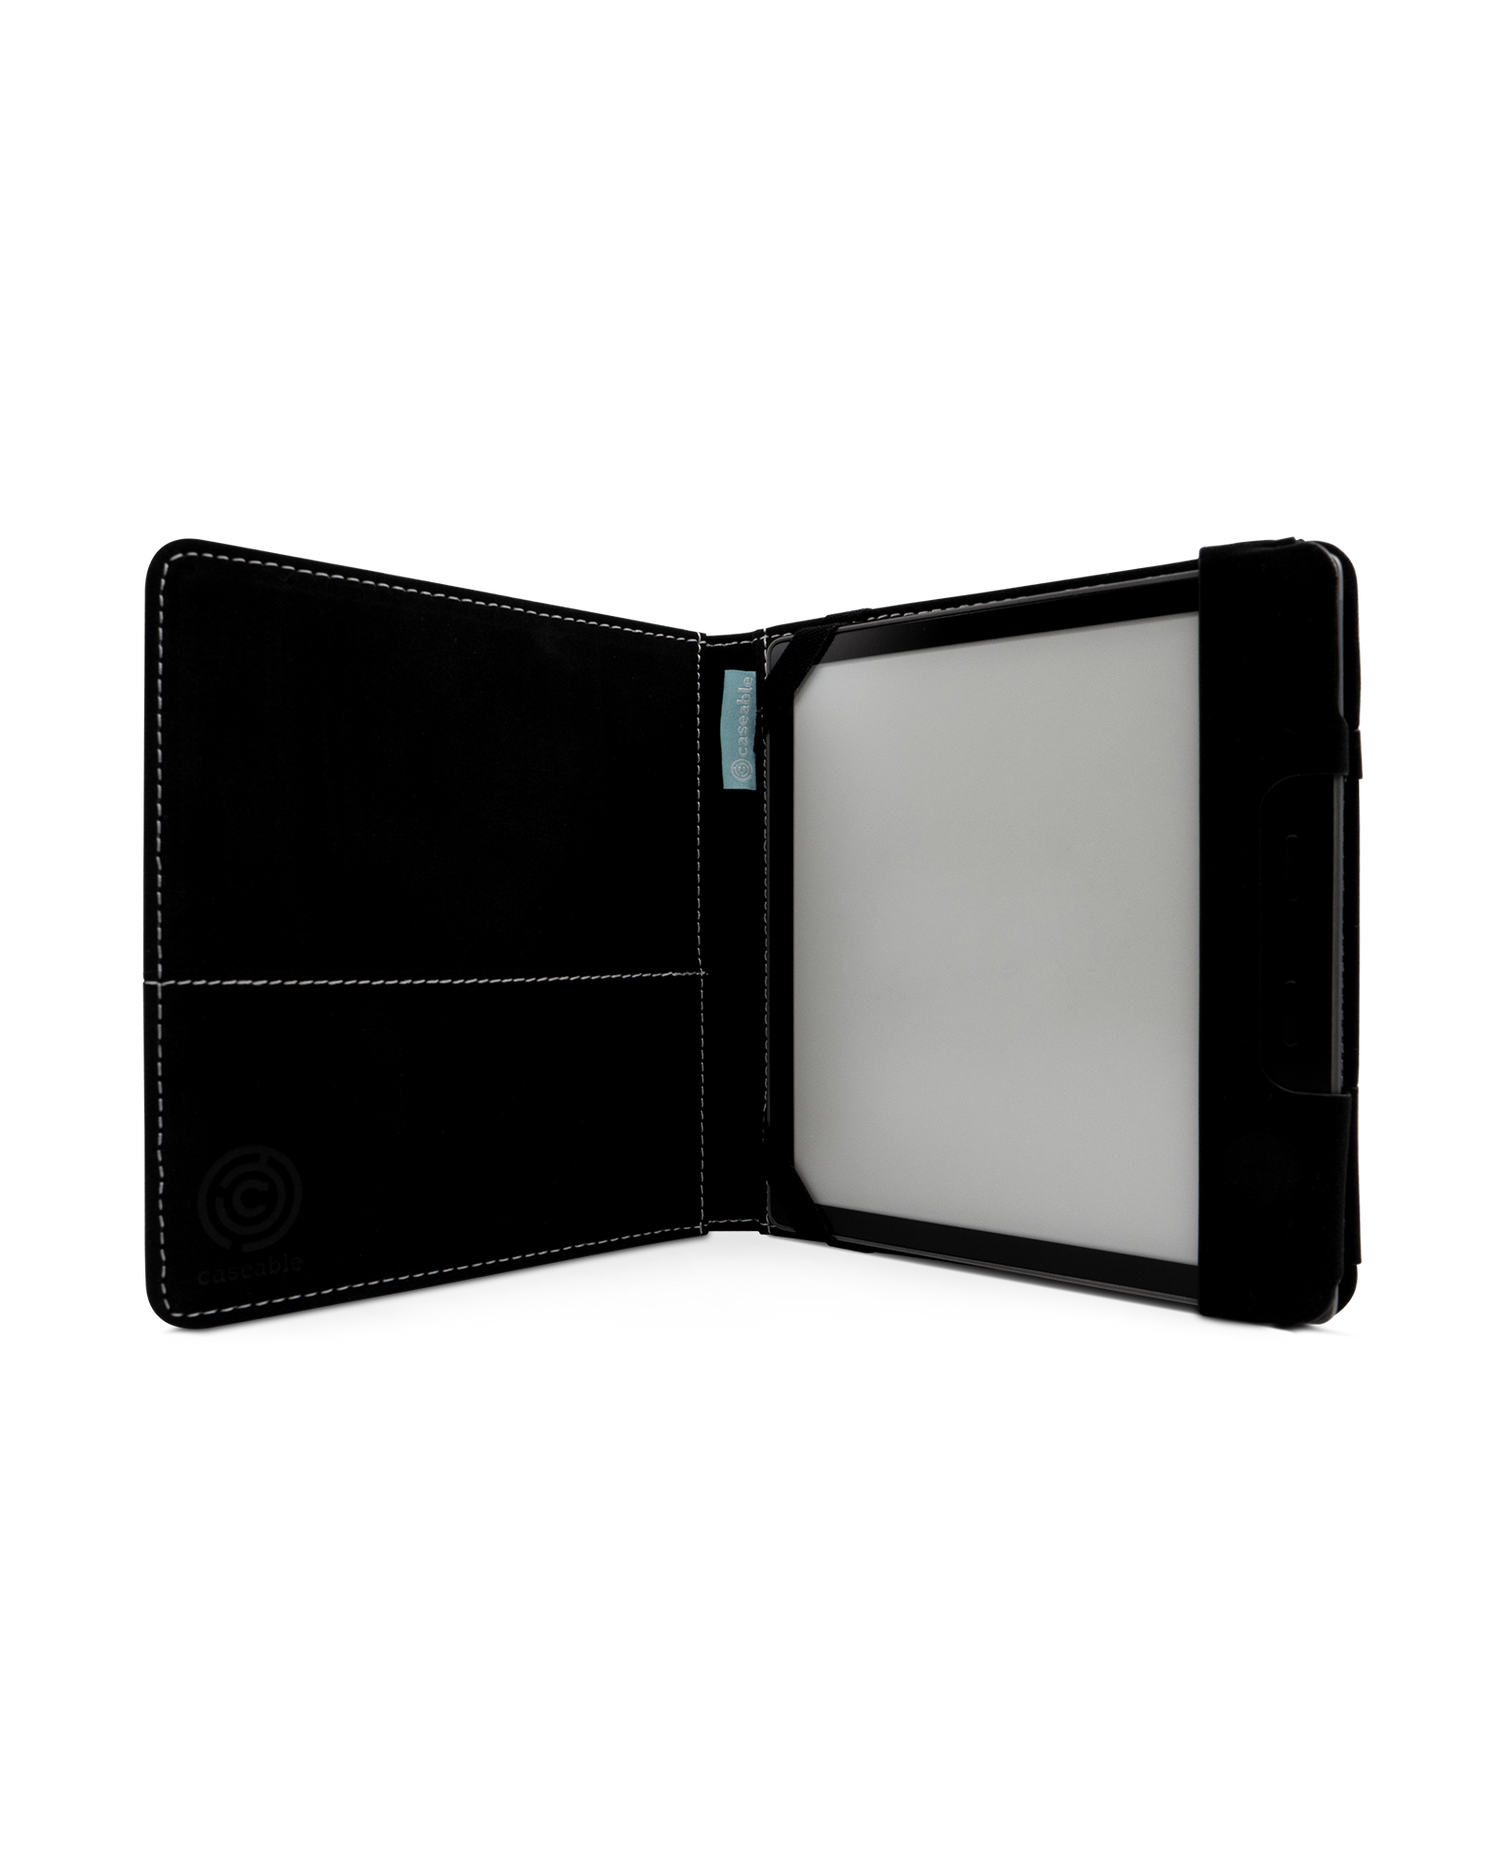 Squares eReader Case for tolino vision 6: Opened interior view